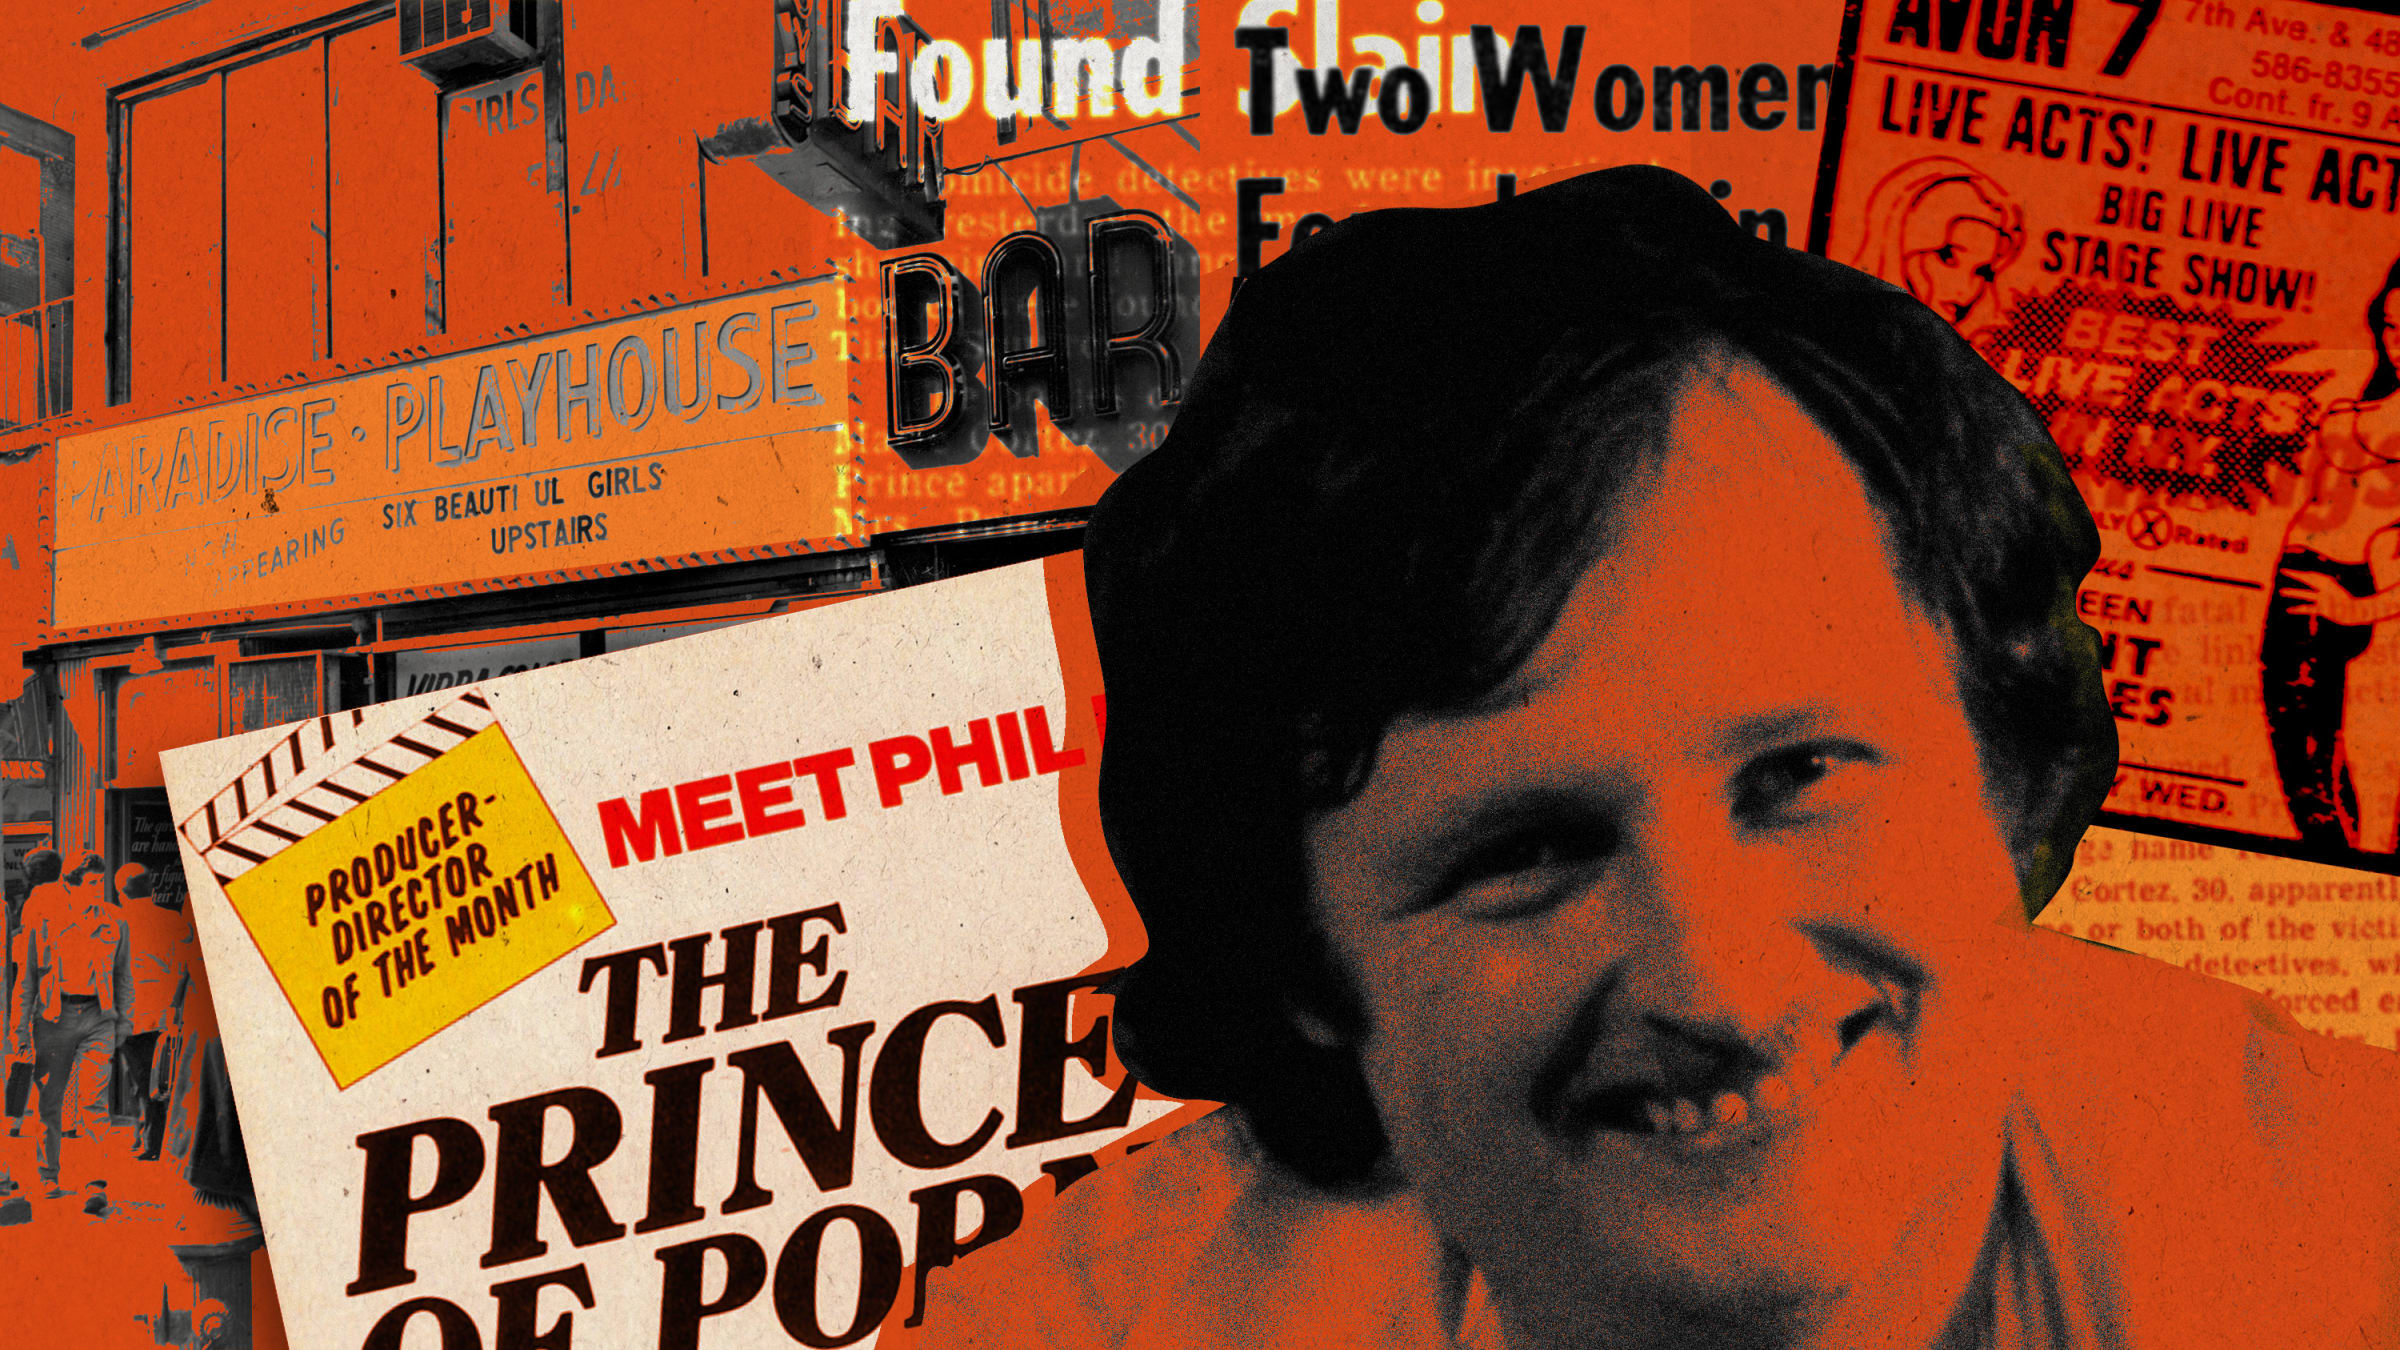 Www Sex Dto - The Porn Prince of New York's Live Sex Shows in 1970s Times Square